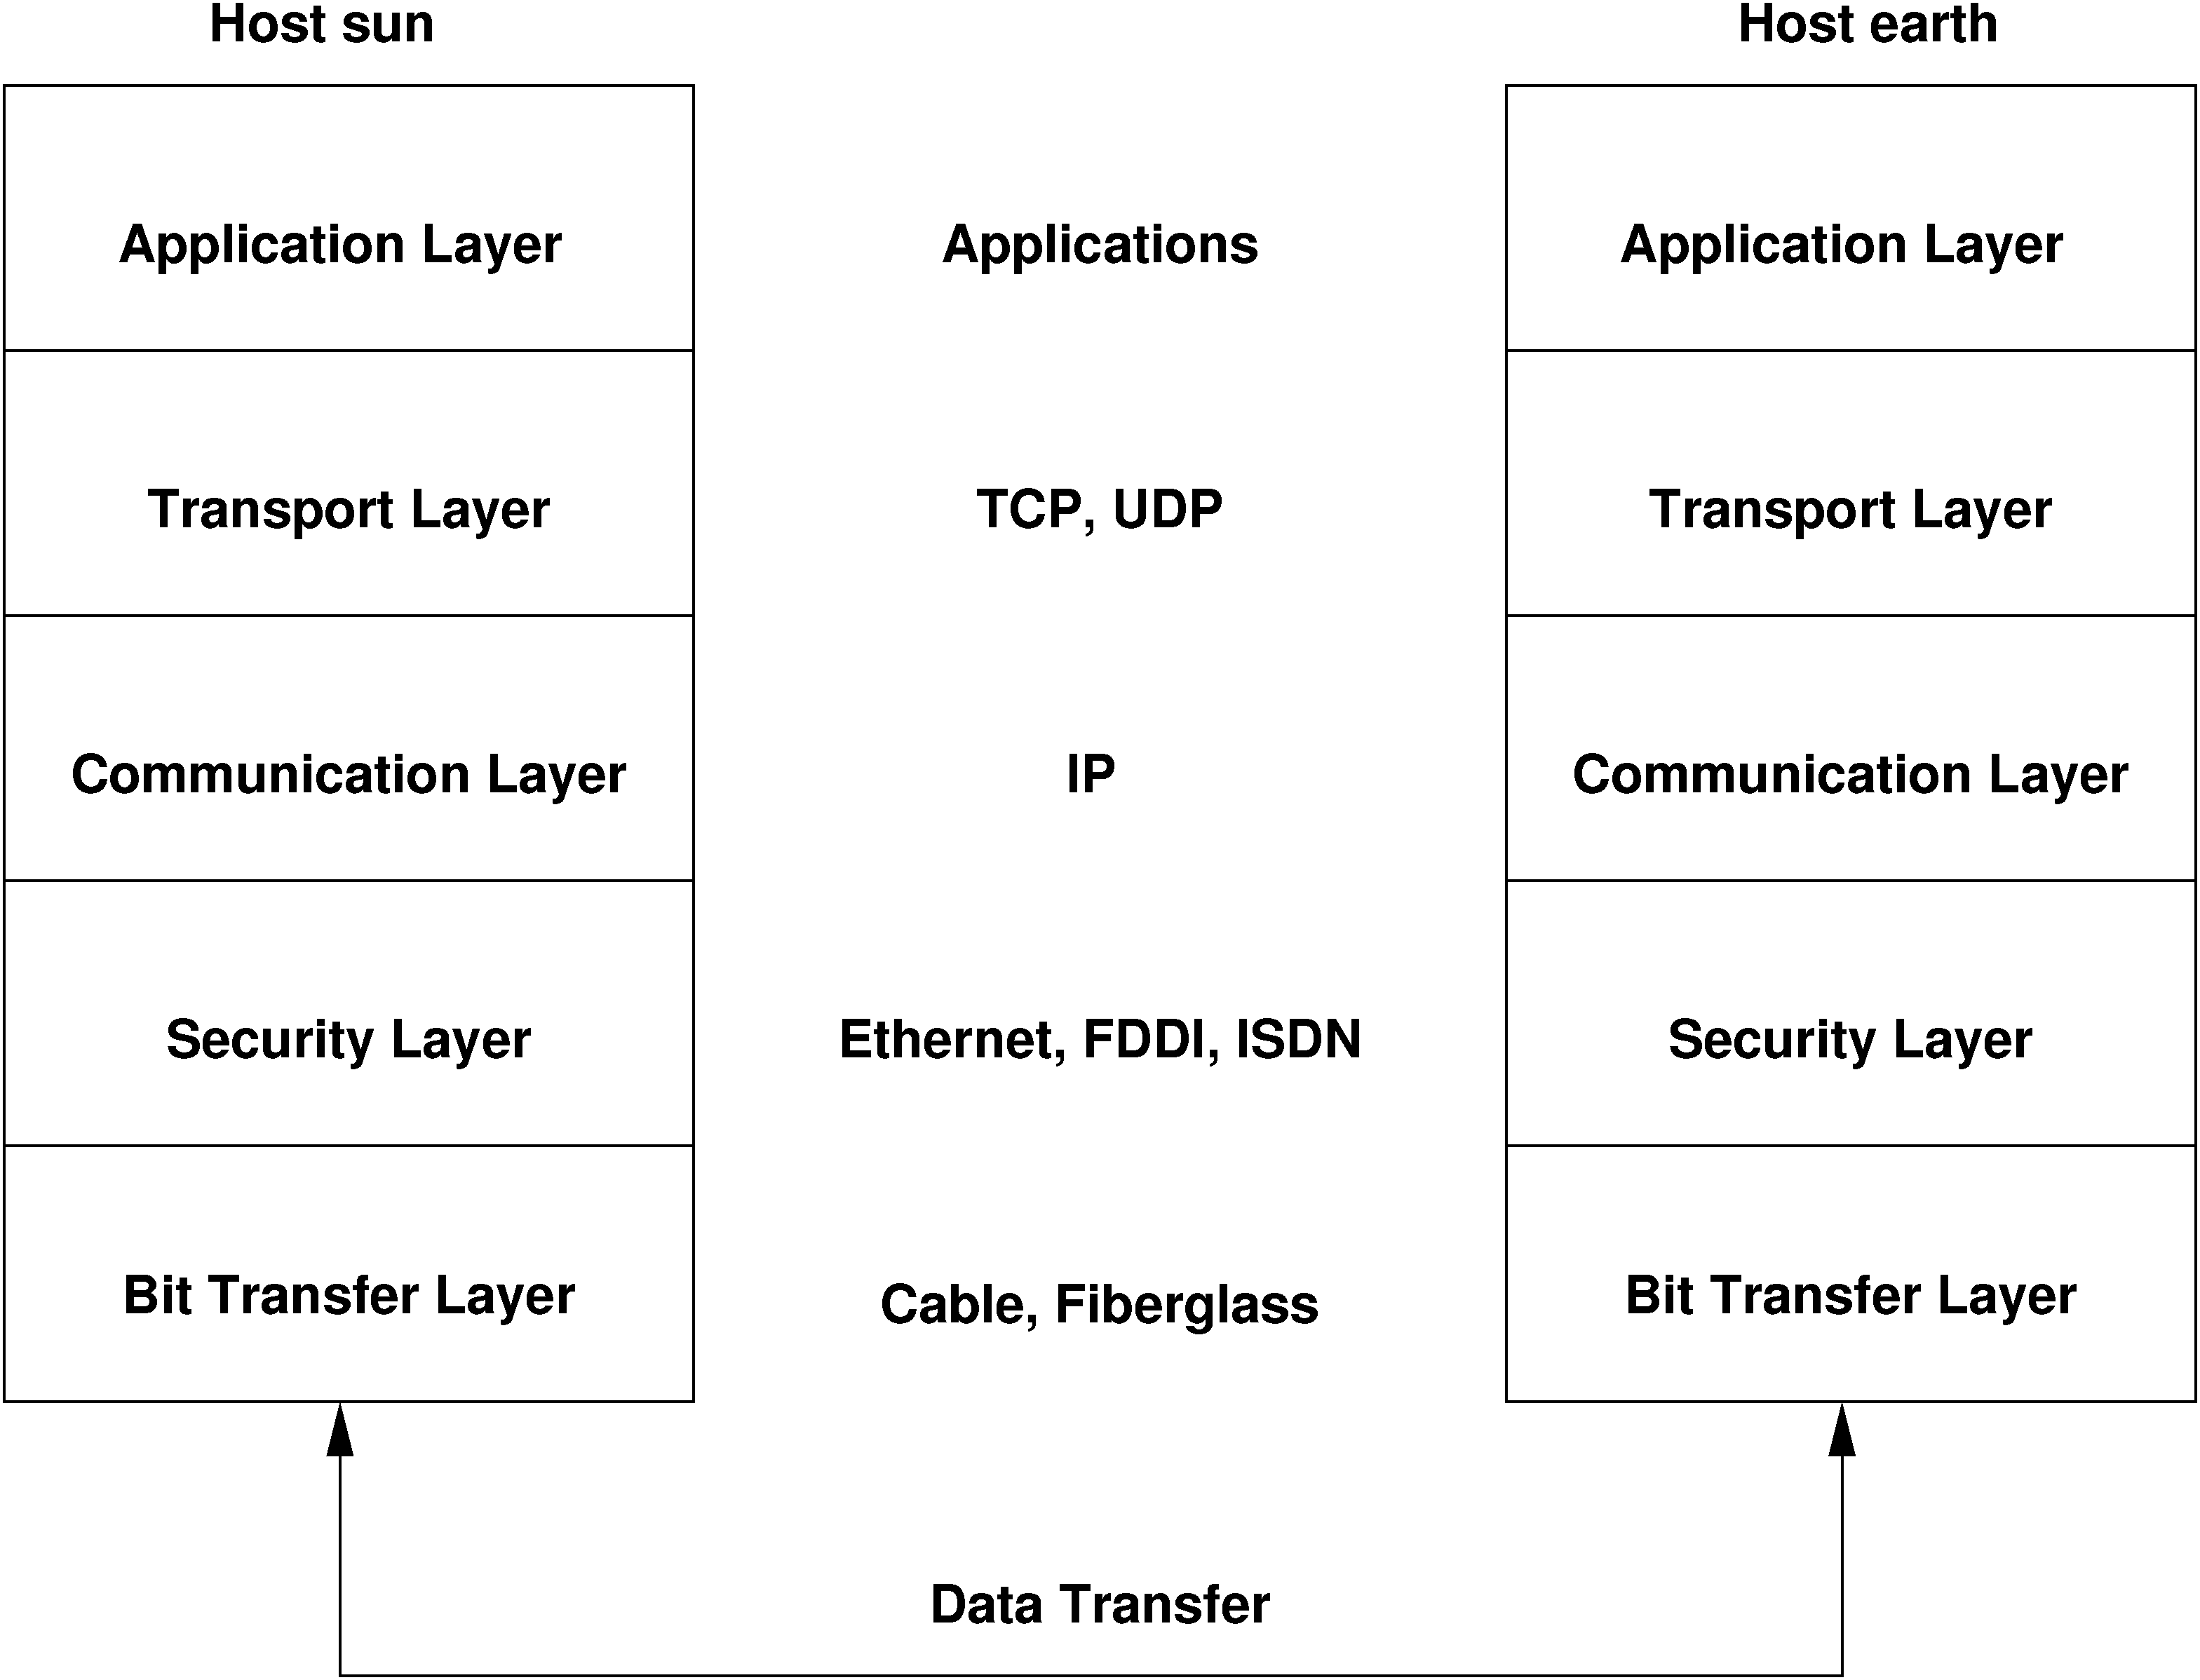 Simplified Layer Model for TCP/IP